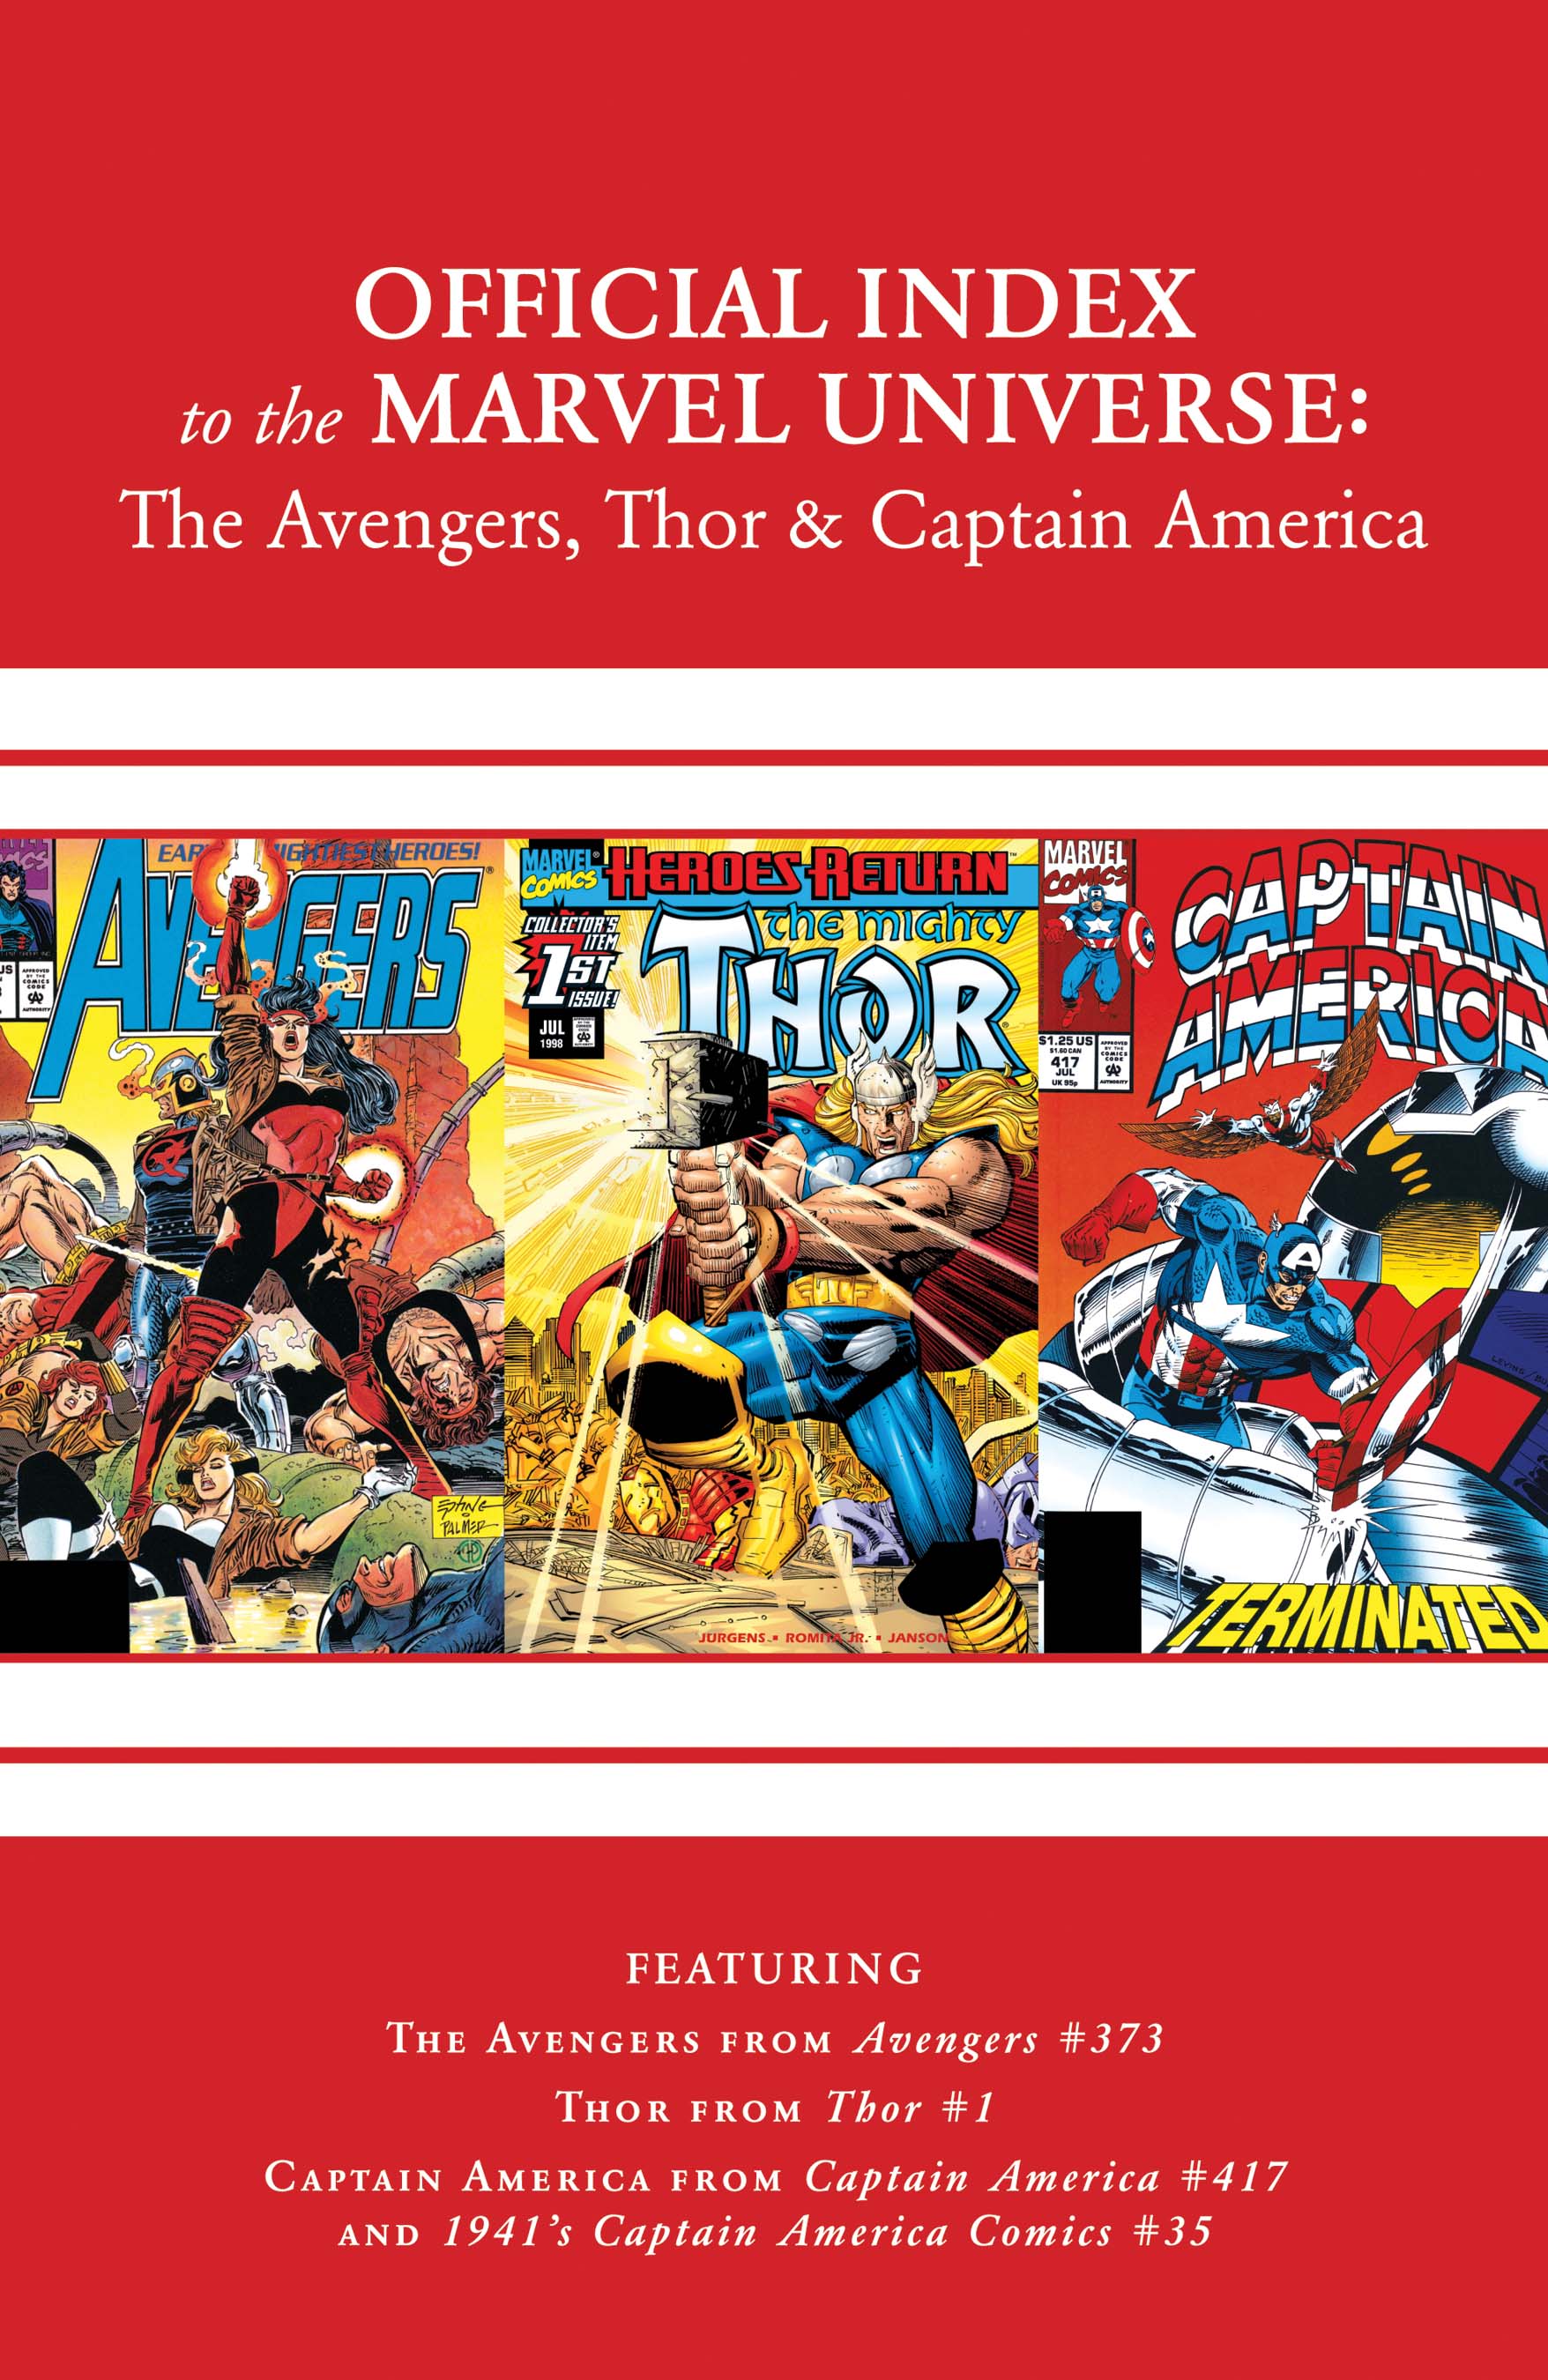 Avengers, Thor & Captain America: Official Index to the Marvel Universe (2010) #11